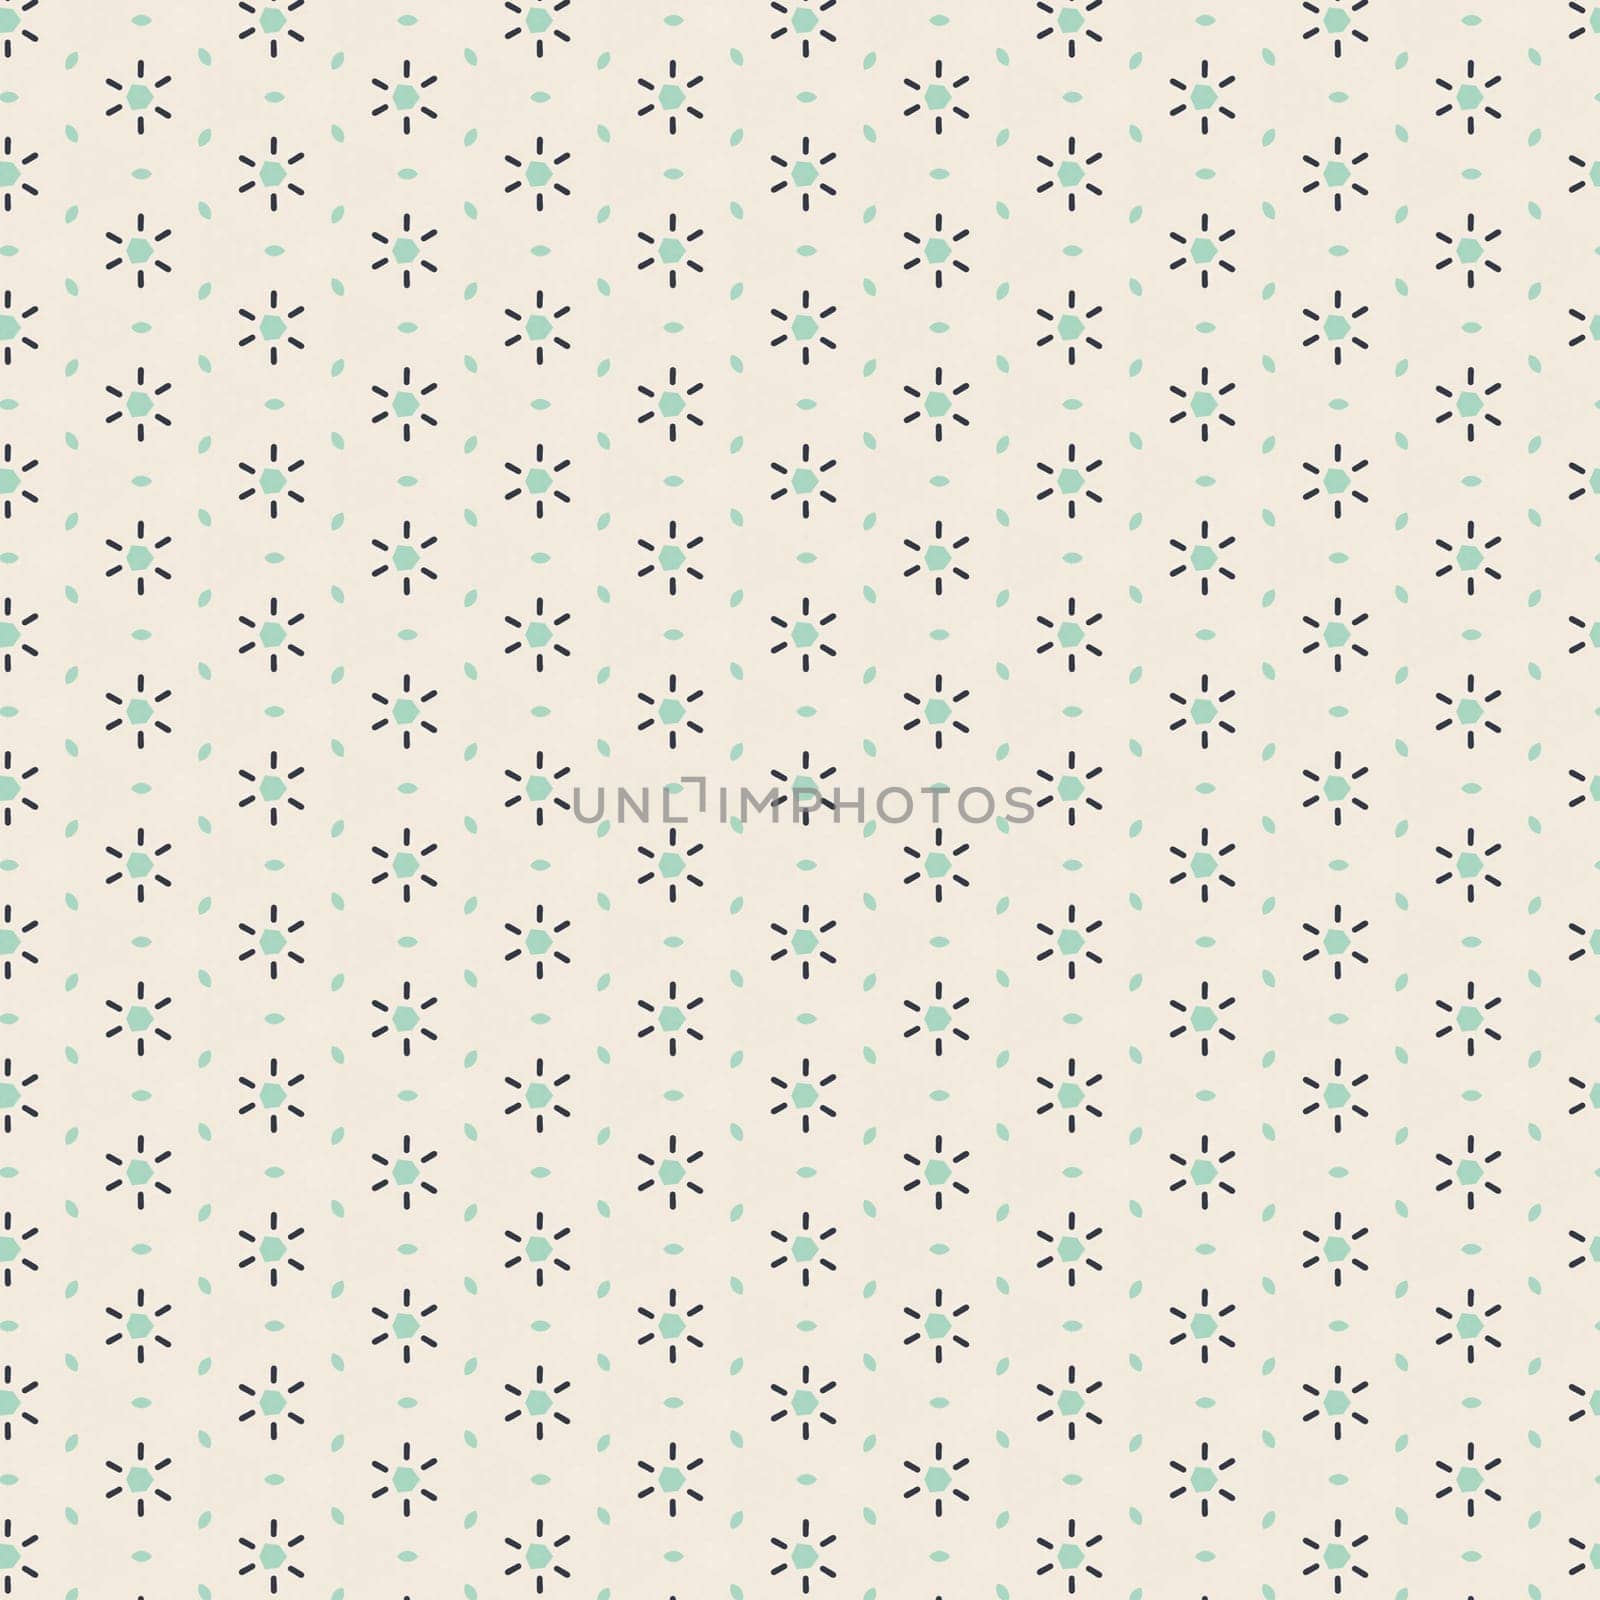 Abstract seamless pattern on white background for usage as an aesthetic and a decorative element by iamnoonmai